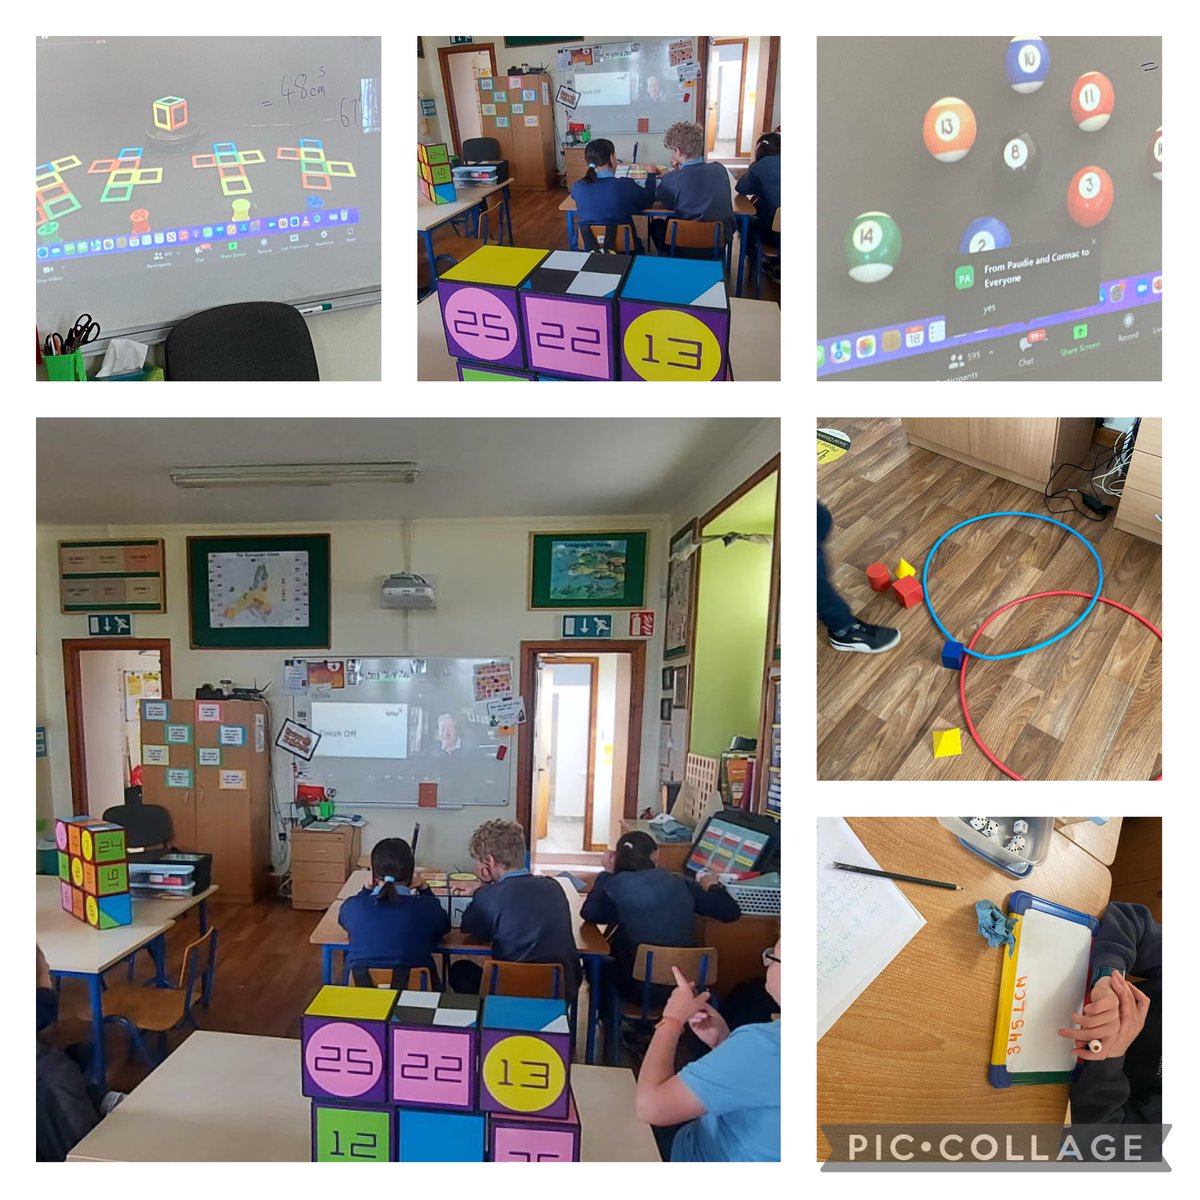 Sharing some of our maths week photos. We had a great online IZAK 9 session and today we participated in the Maths week quiz! Brains working overtime in Doonaha NS today! ⁦@mathsweek⁩ ⁦@AbacusandHelix⁩ #mathsweek